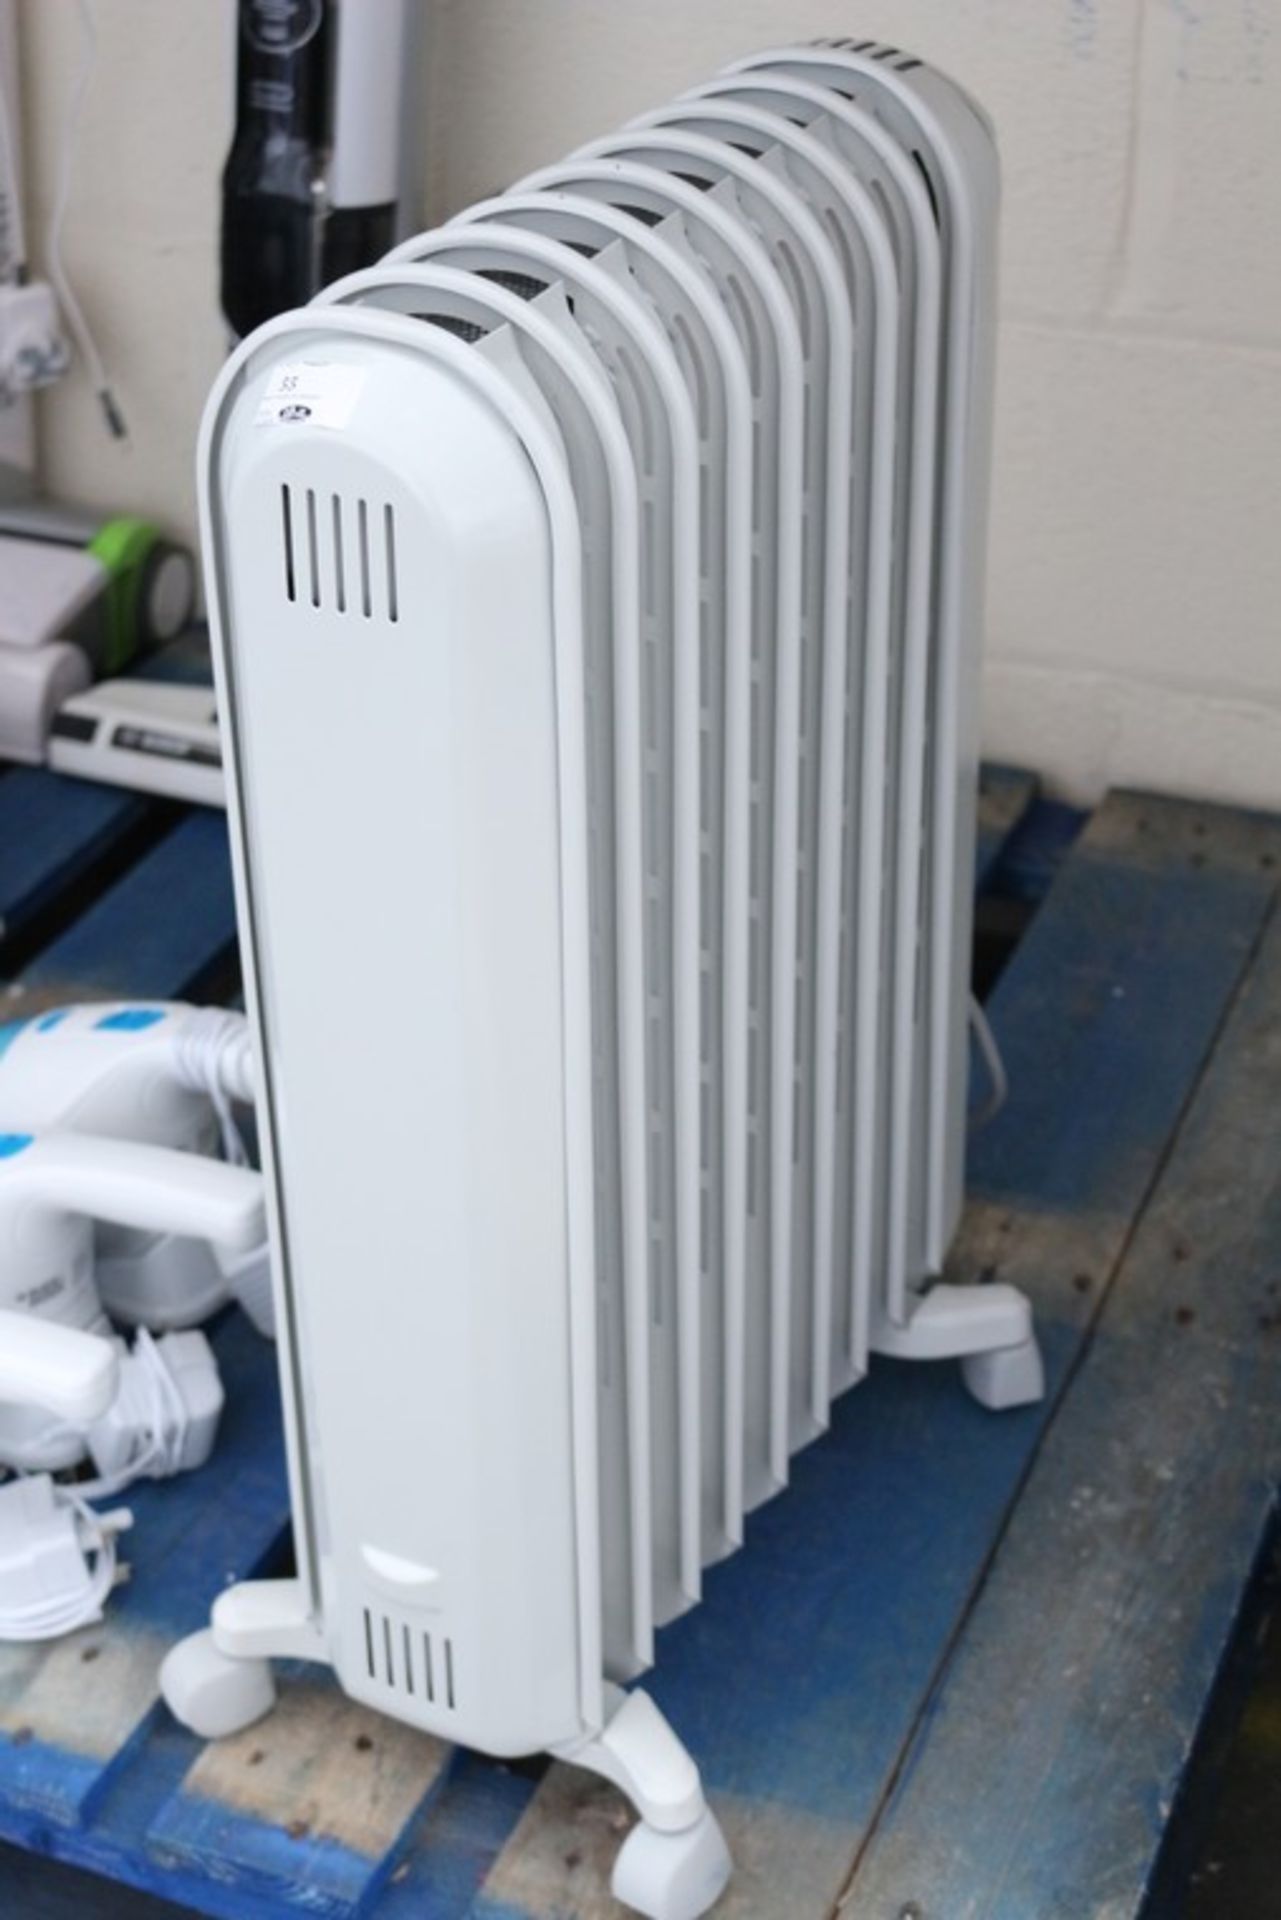 1 x DELONGHI VENTO ELECTRICALLY HEATED OIL FILLED RADIATOR *PLEASE NOTE THAT THE BID PRICE IS